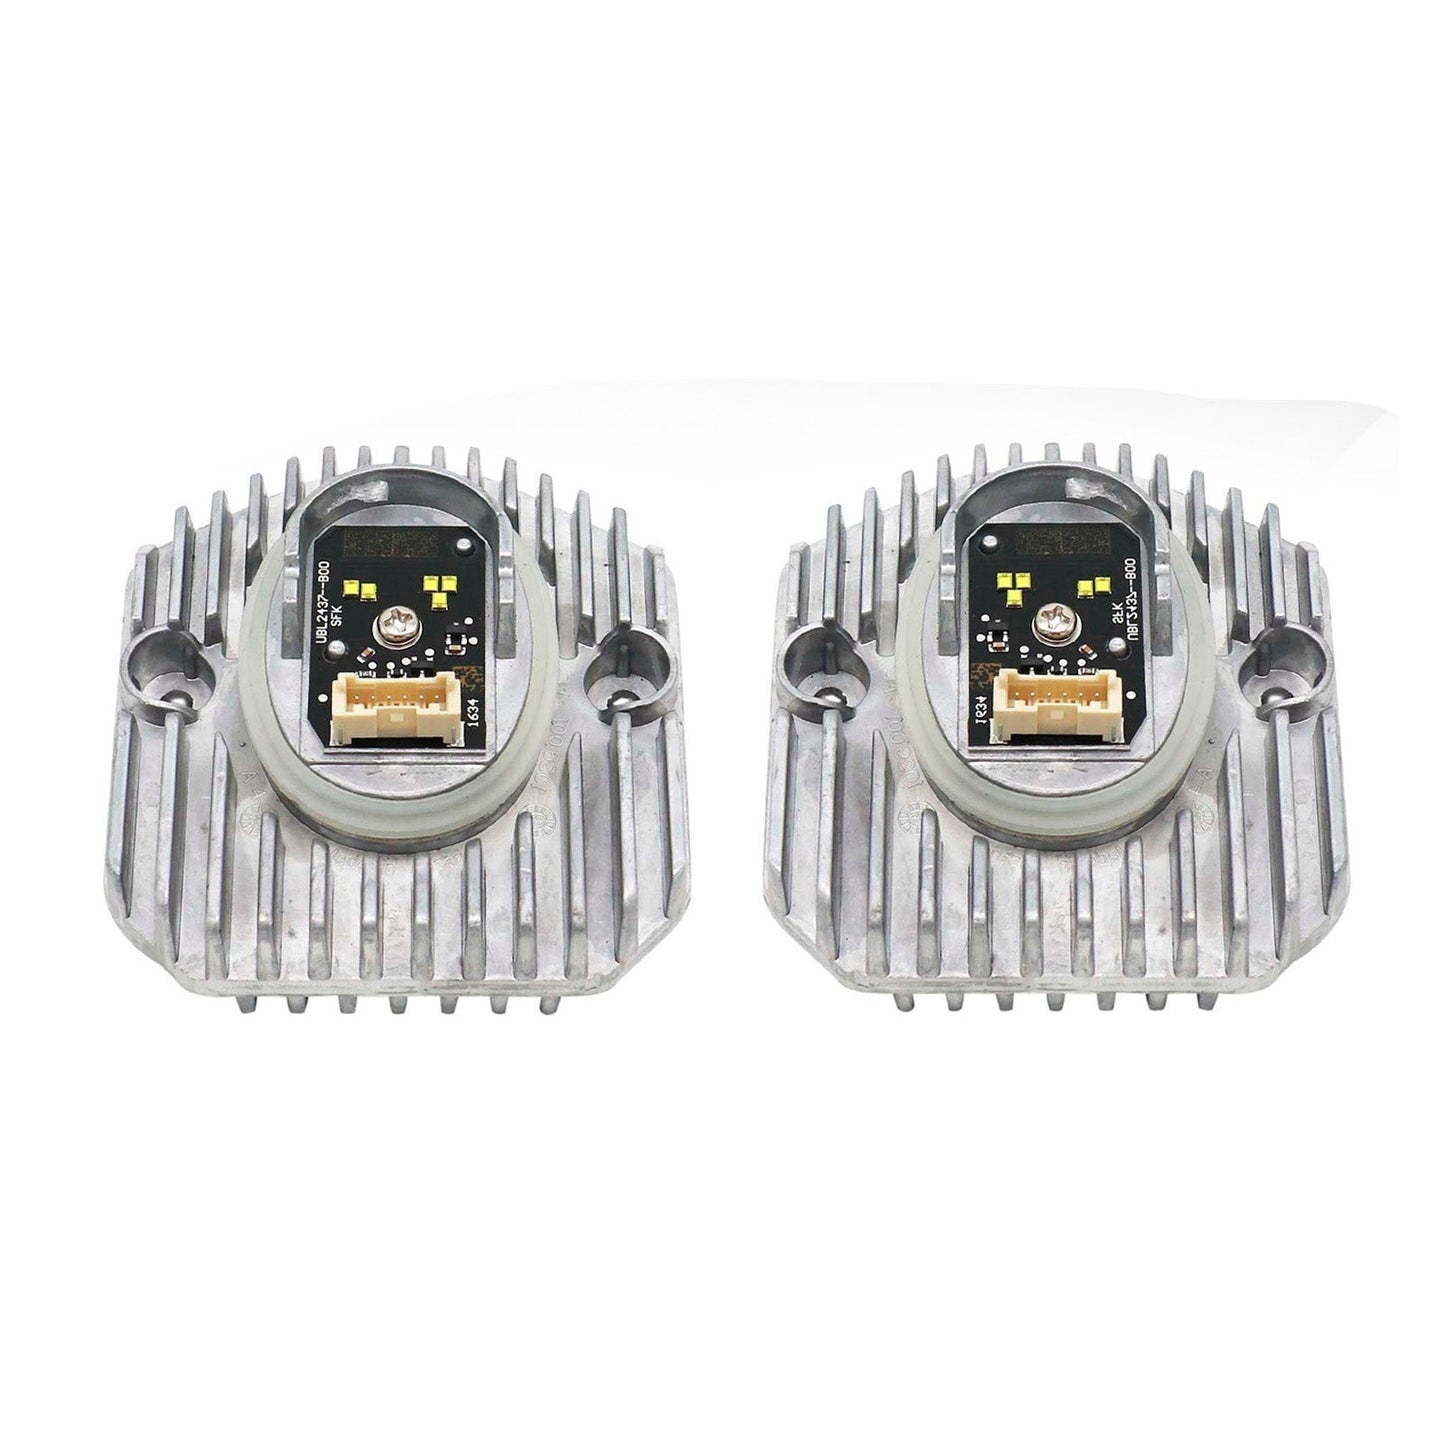 2x LED DRL Light Control Unit 63117214939/40 For BMW 5 Series G30 G38 2017-